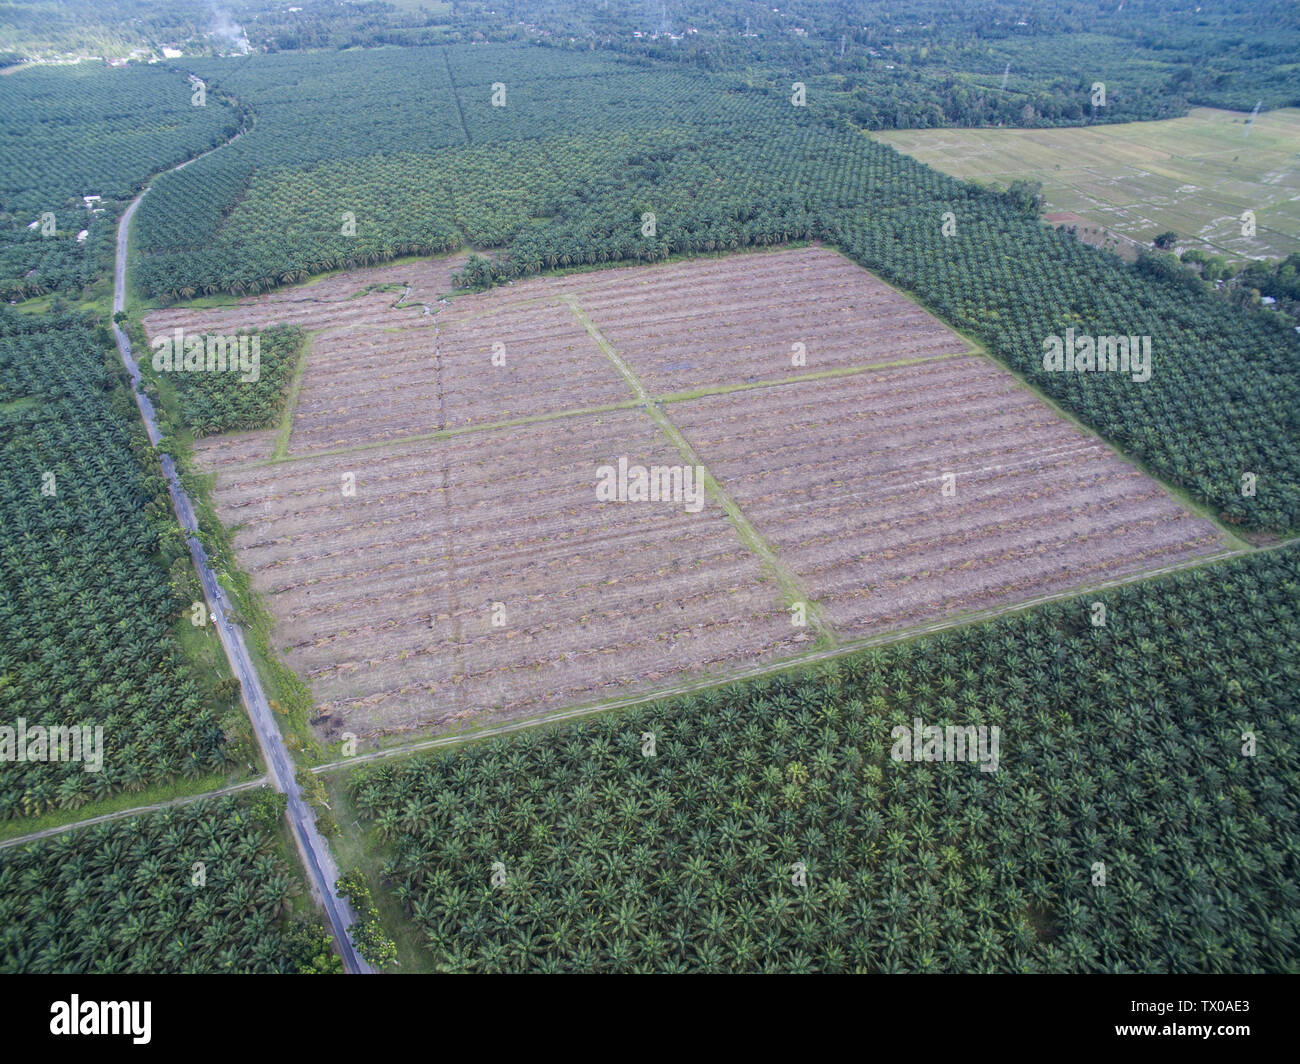 Replantation or Rejuvenation of palm oil tree or plantation in South Sulawesi, Indonesia. Stock Photo